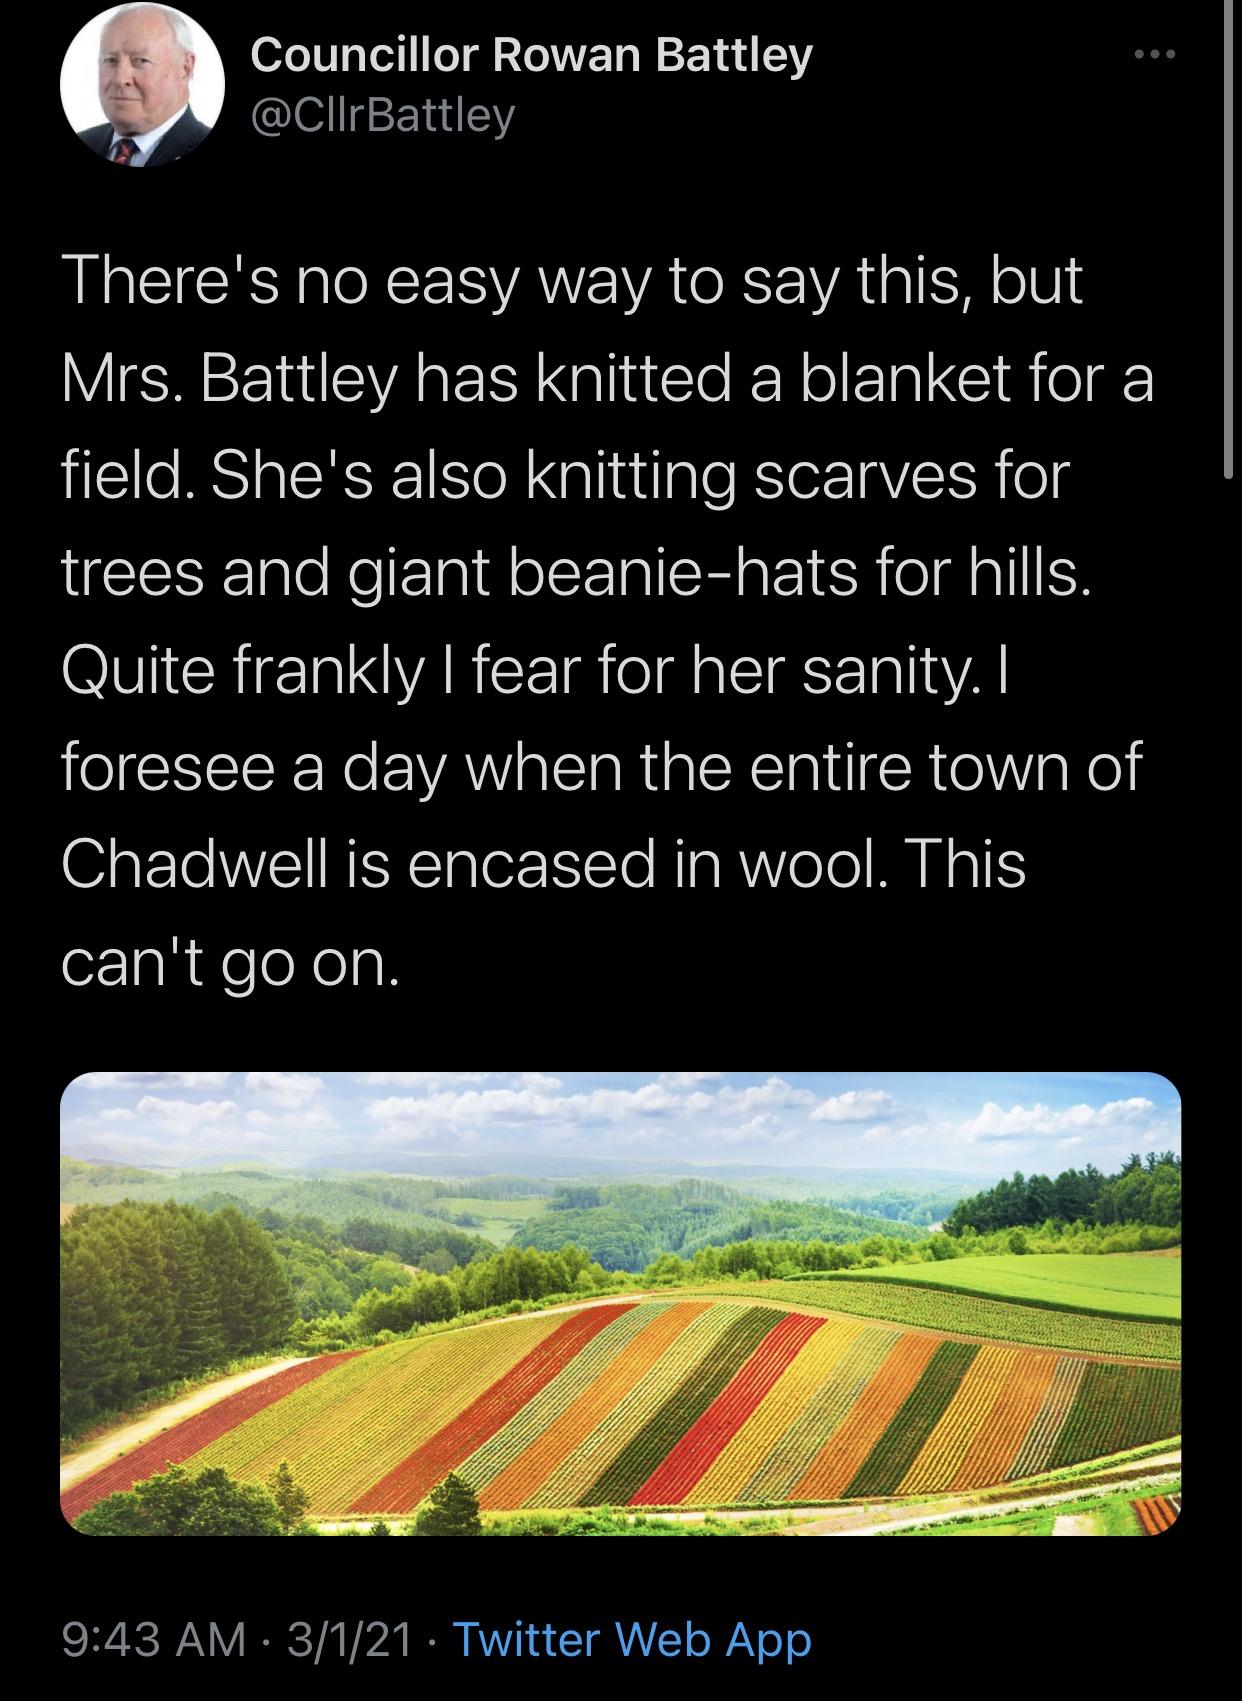 the funniest tweets - shikisai no oka - Councillor Rowan Battley There's no easy way to say this, but Mrs. Battley has knitted a blanket for a field. She's also knitting scarves for trees and giant beaniehats for hills. Quite frankly I fear for her sanity